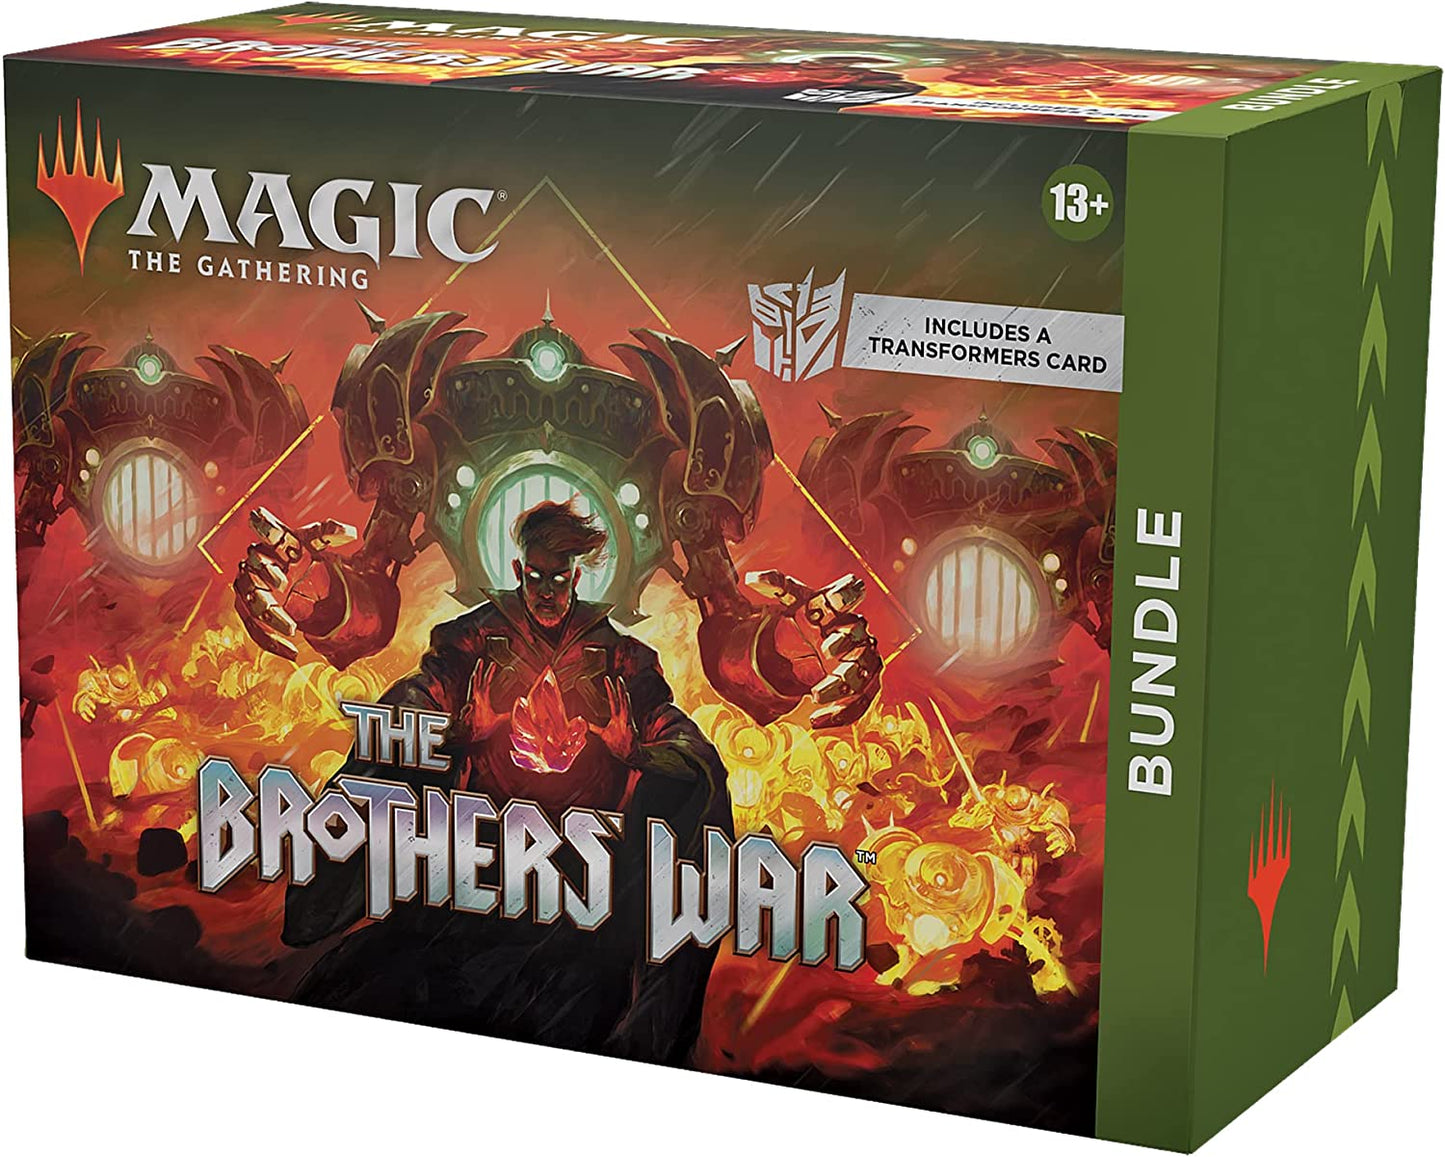 Magic: The Gathering Bundle Case - The Brothers' War (Case of 6)